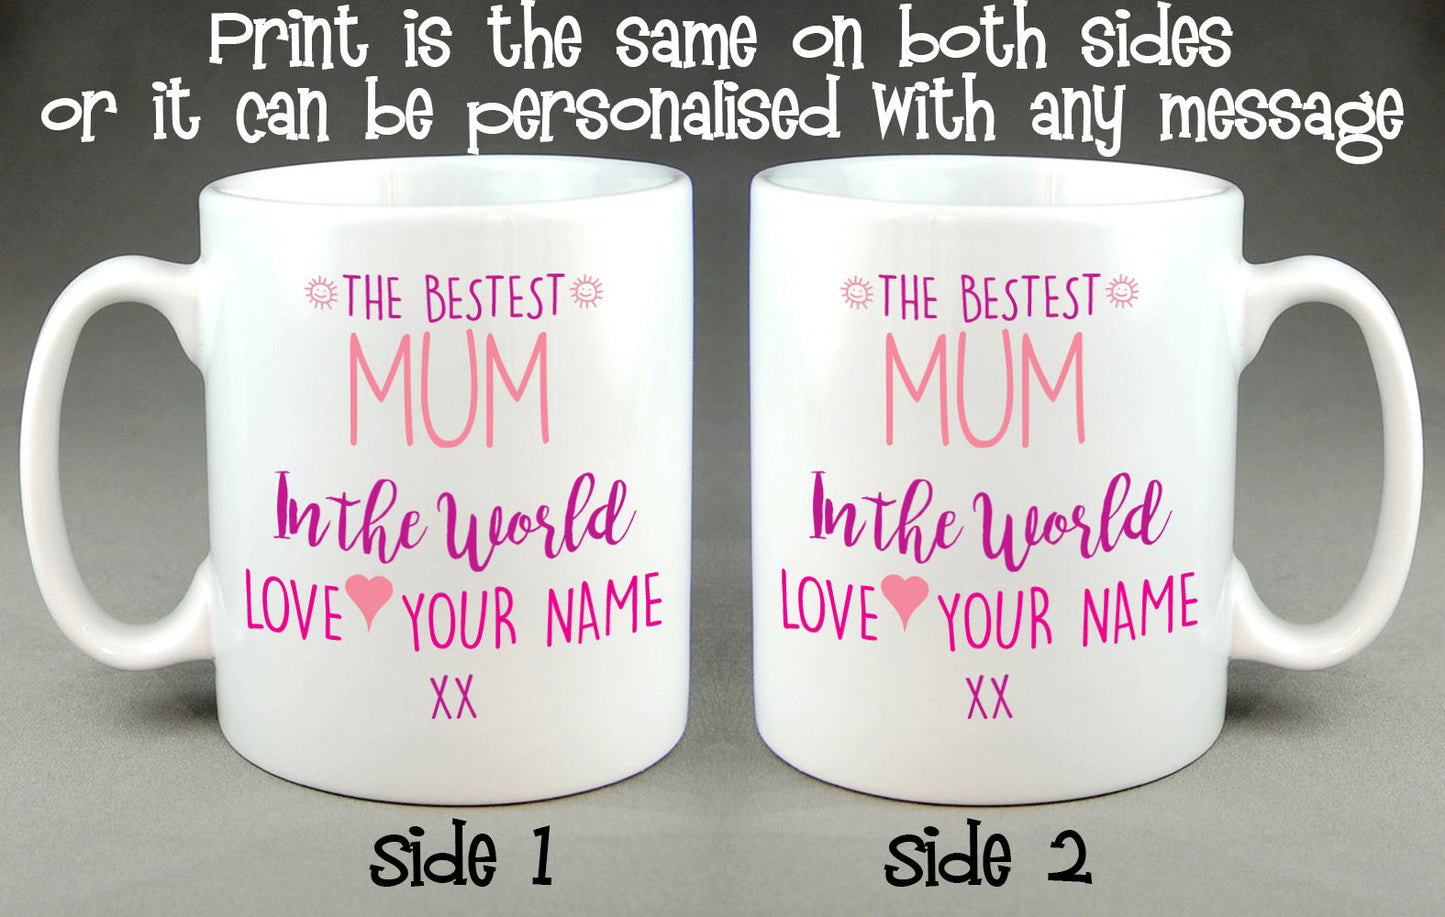 The Bestest Mum (or Mummy) in the World Personalised Mug Mother's Day Gift